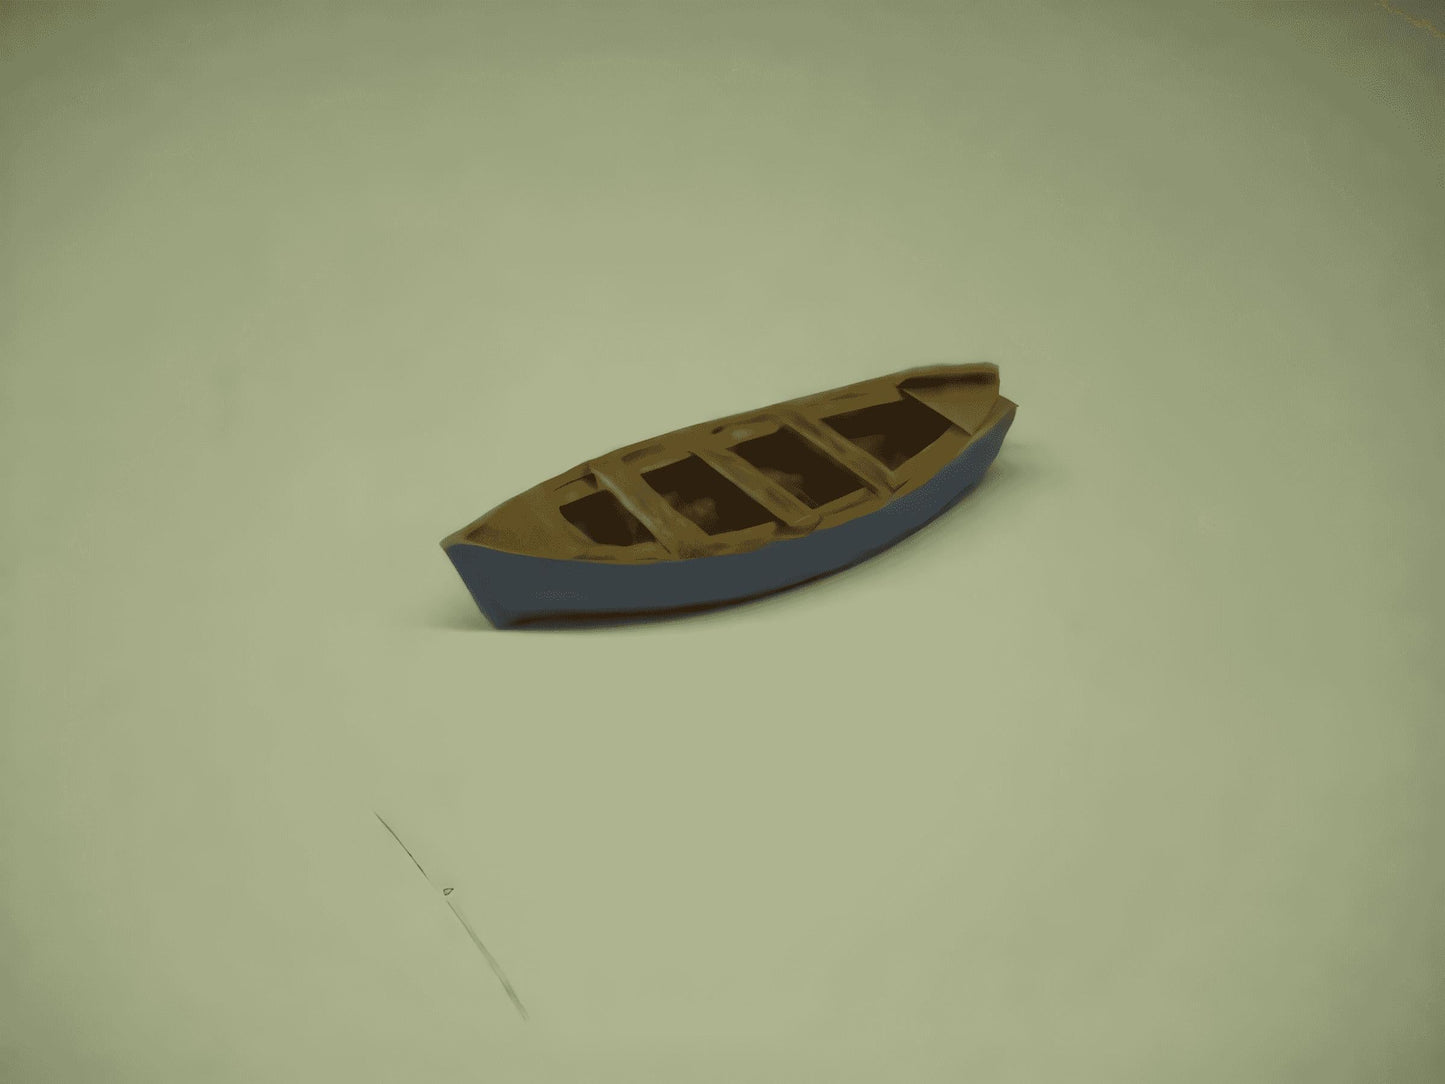 1:76 LARGE ROWING BOAT